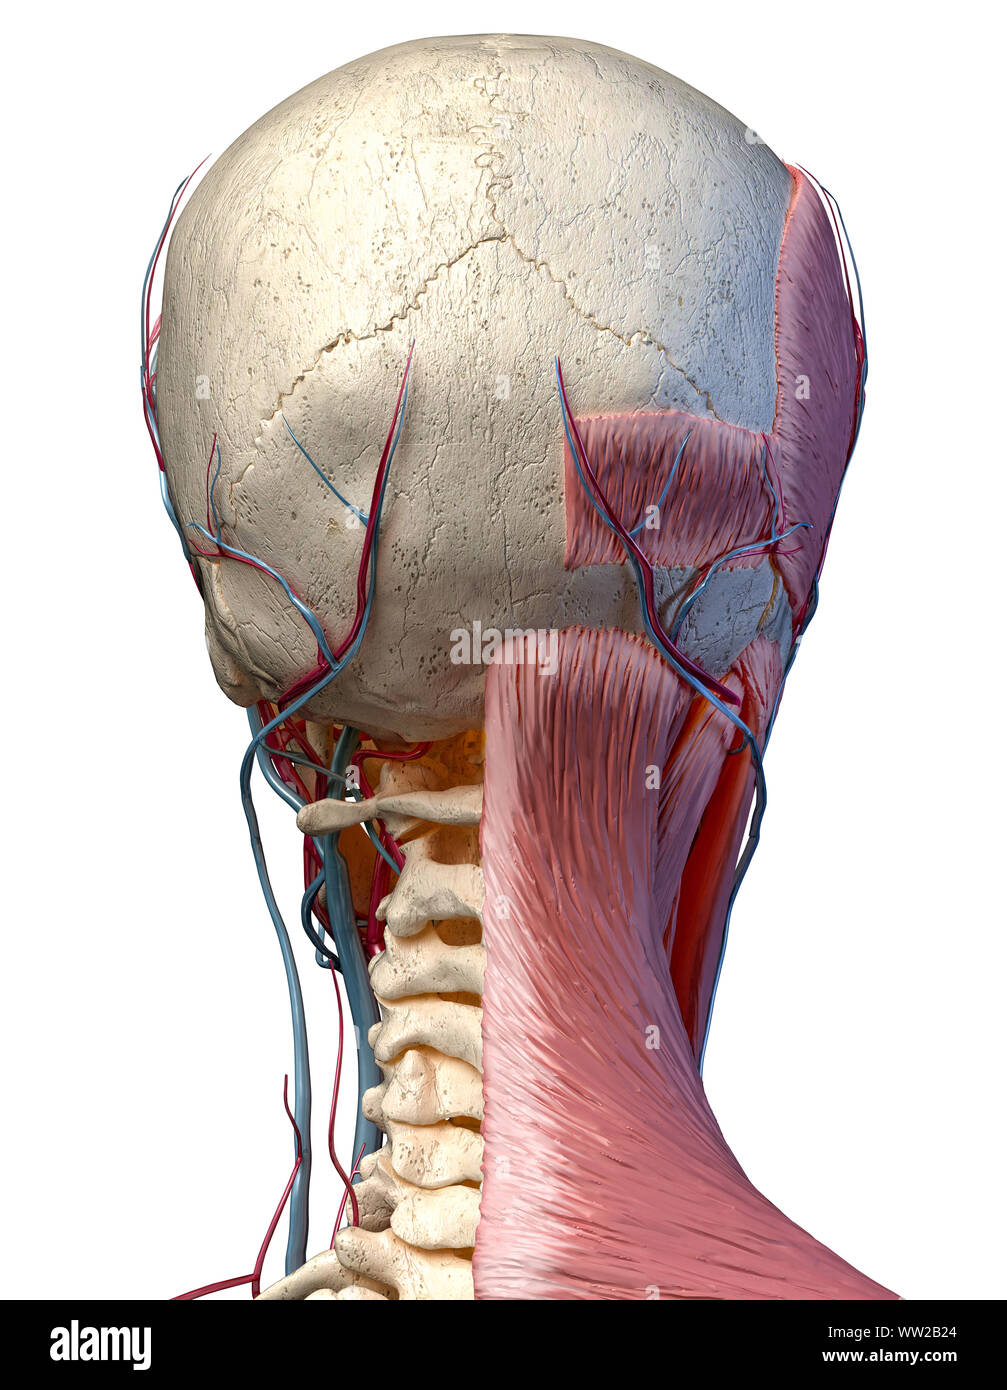 Human Anatomy 3d Illustration Of Head With Skull Blood Vessels And Muscles On White Background Rear View Stock Photo Alamy